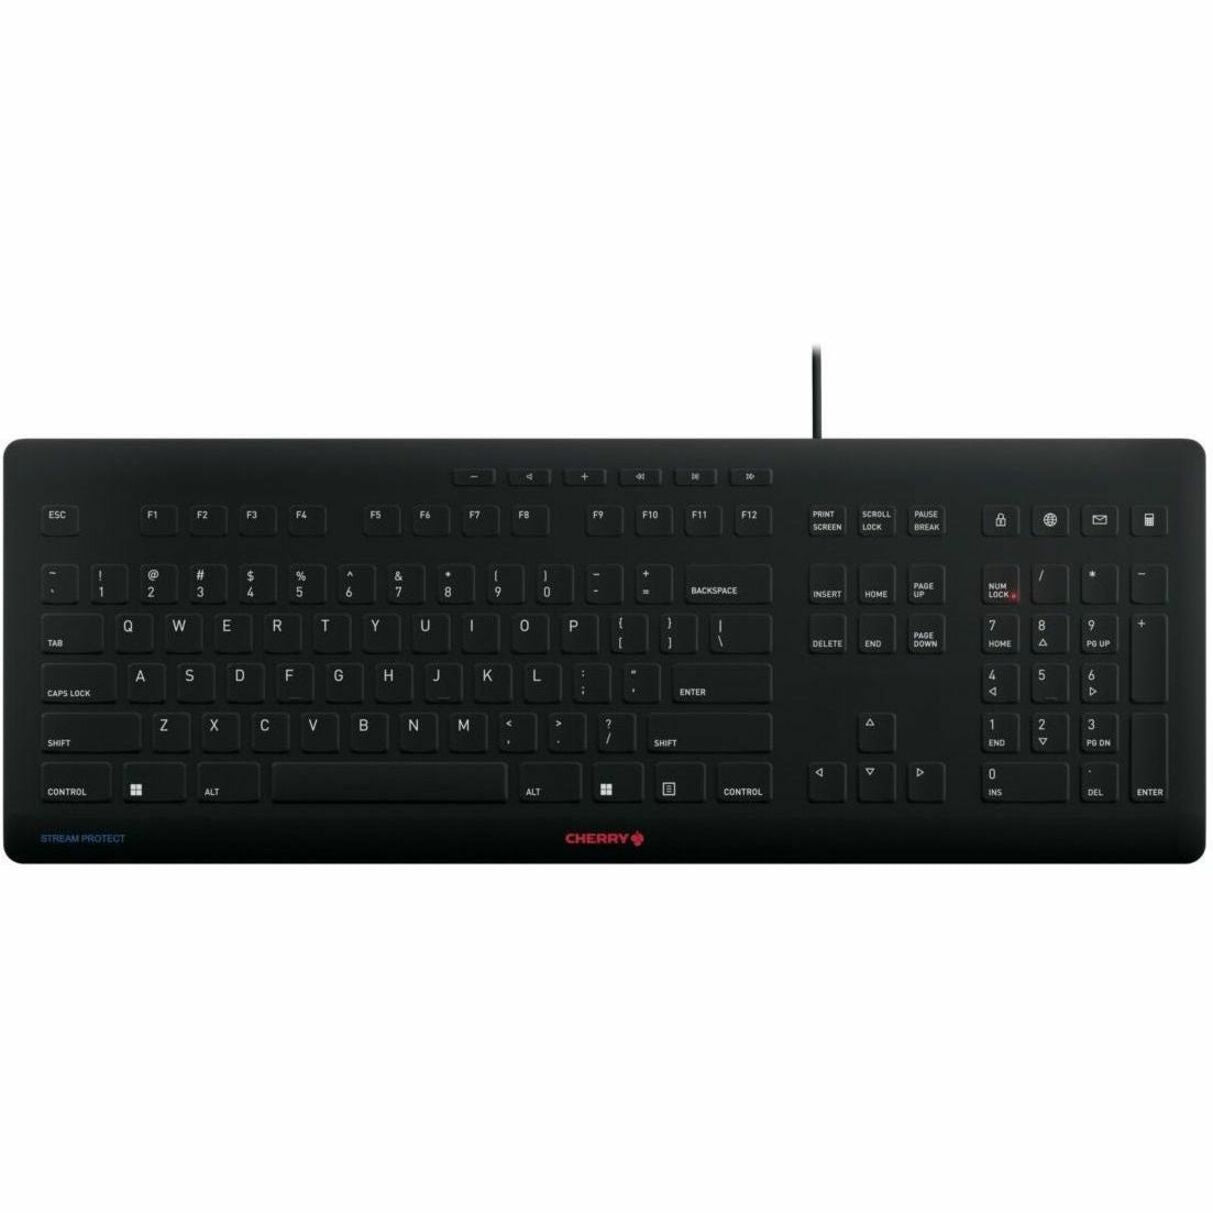 CHERRY JK-8502US-2 STREAM PROTECT Keyboard, USB Cable, Water Resistant, LED Indicator